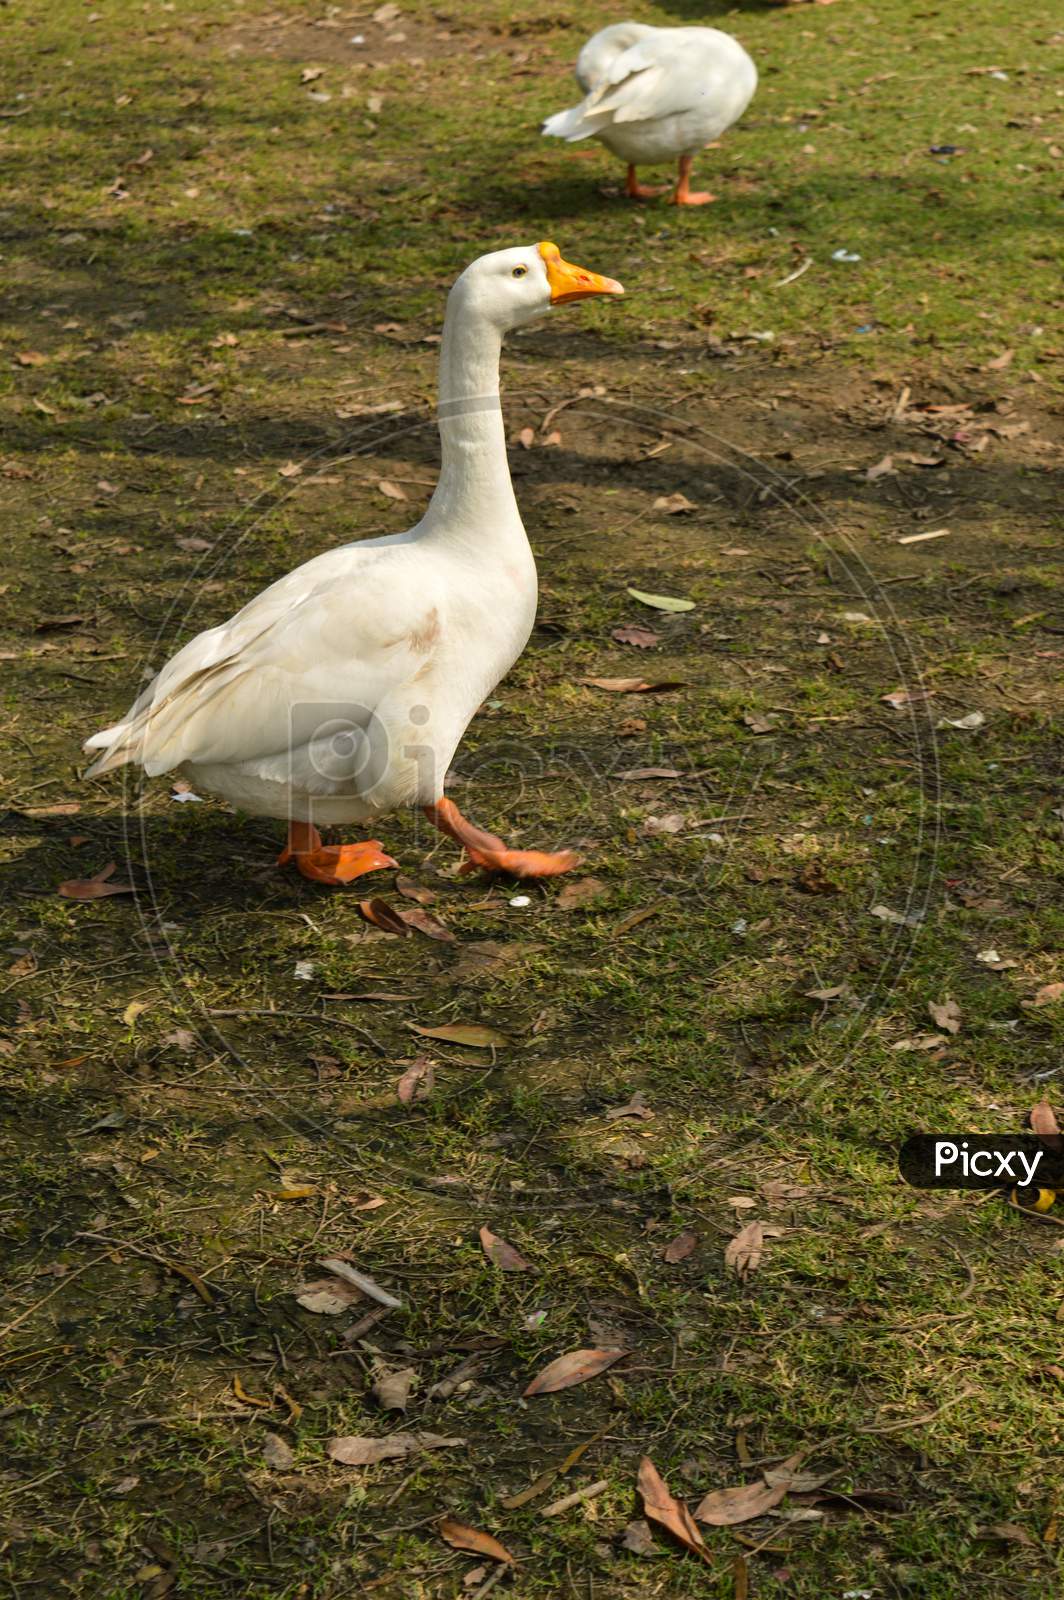 A White Color Duck Walking,Roaming Around At Garden, Lawn At Winter Foggy Morning.